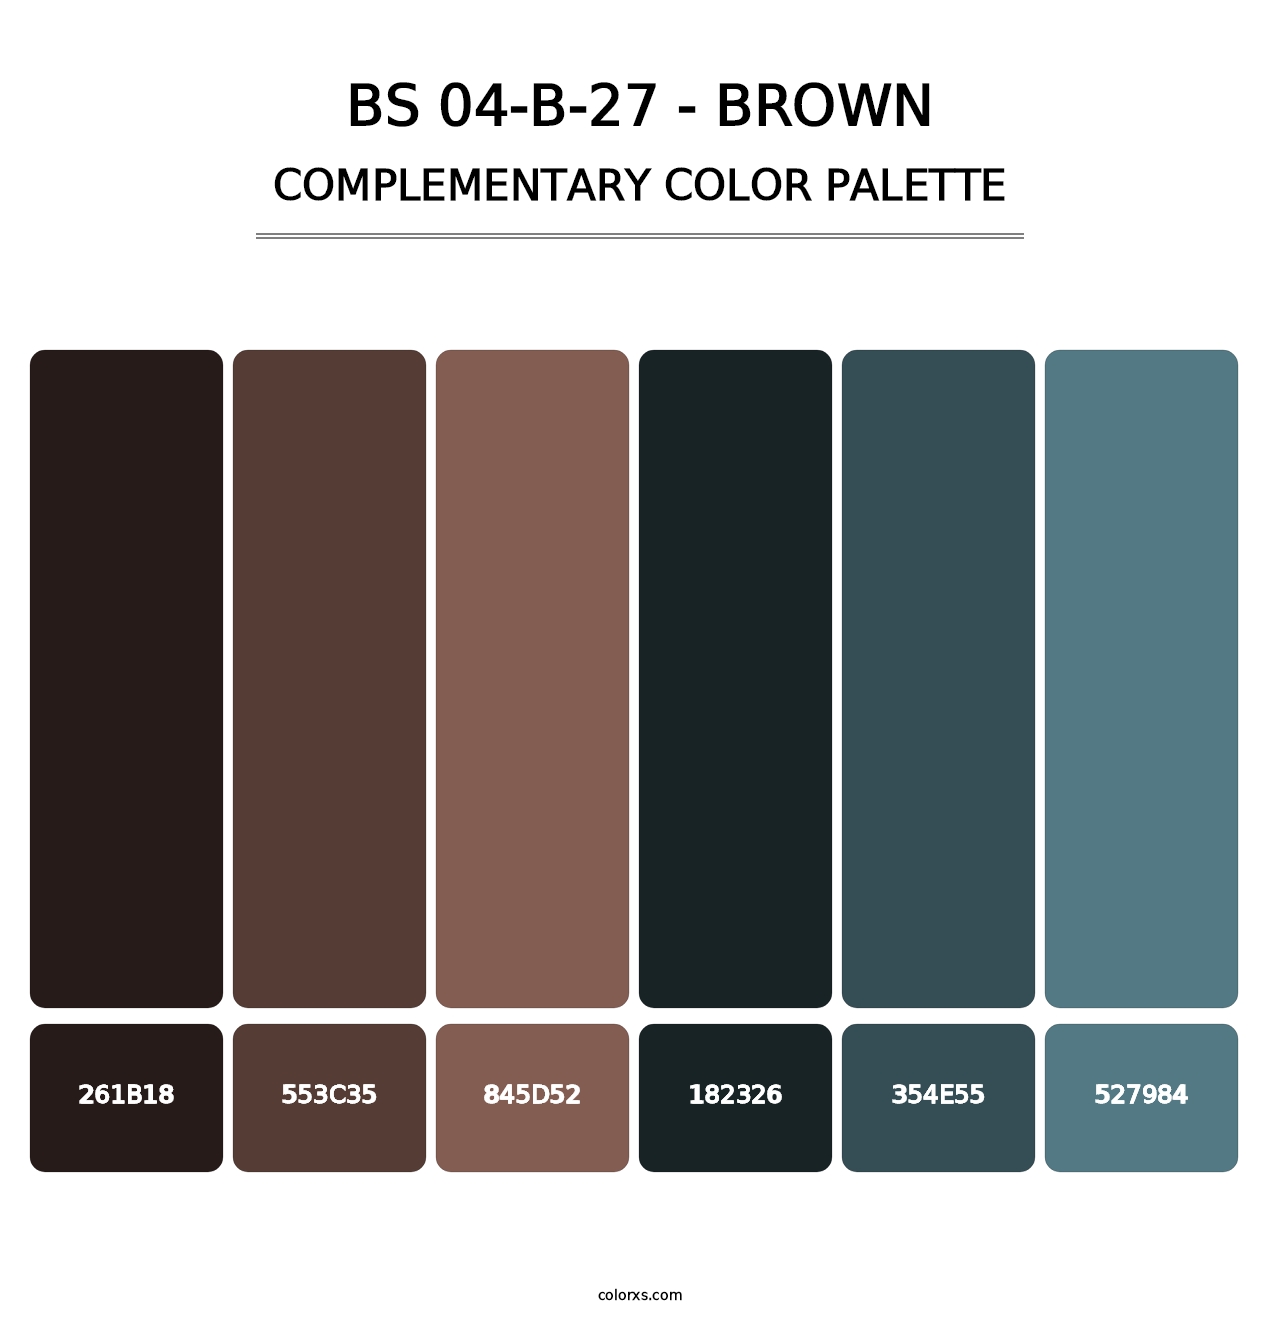 BS 04-B-27 - Brown - Complementary Color Palette